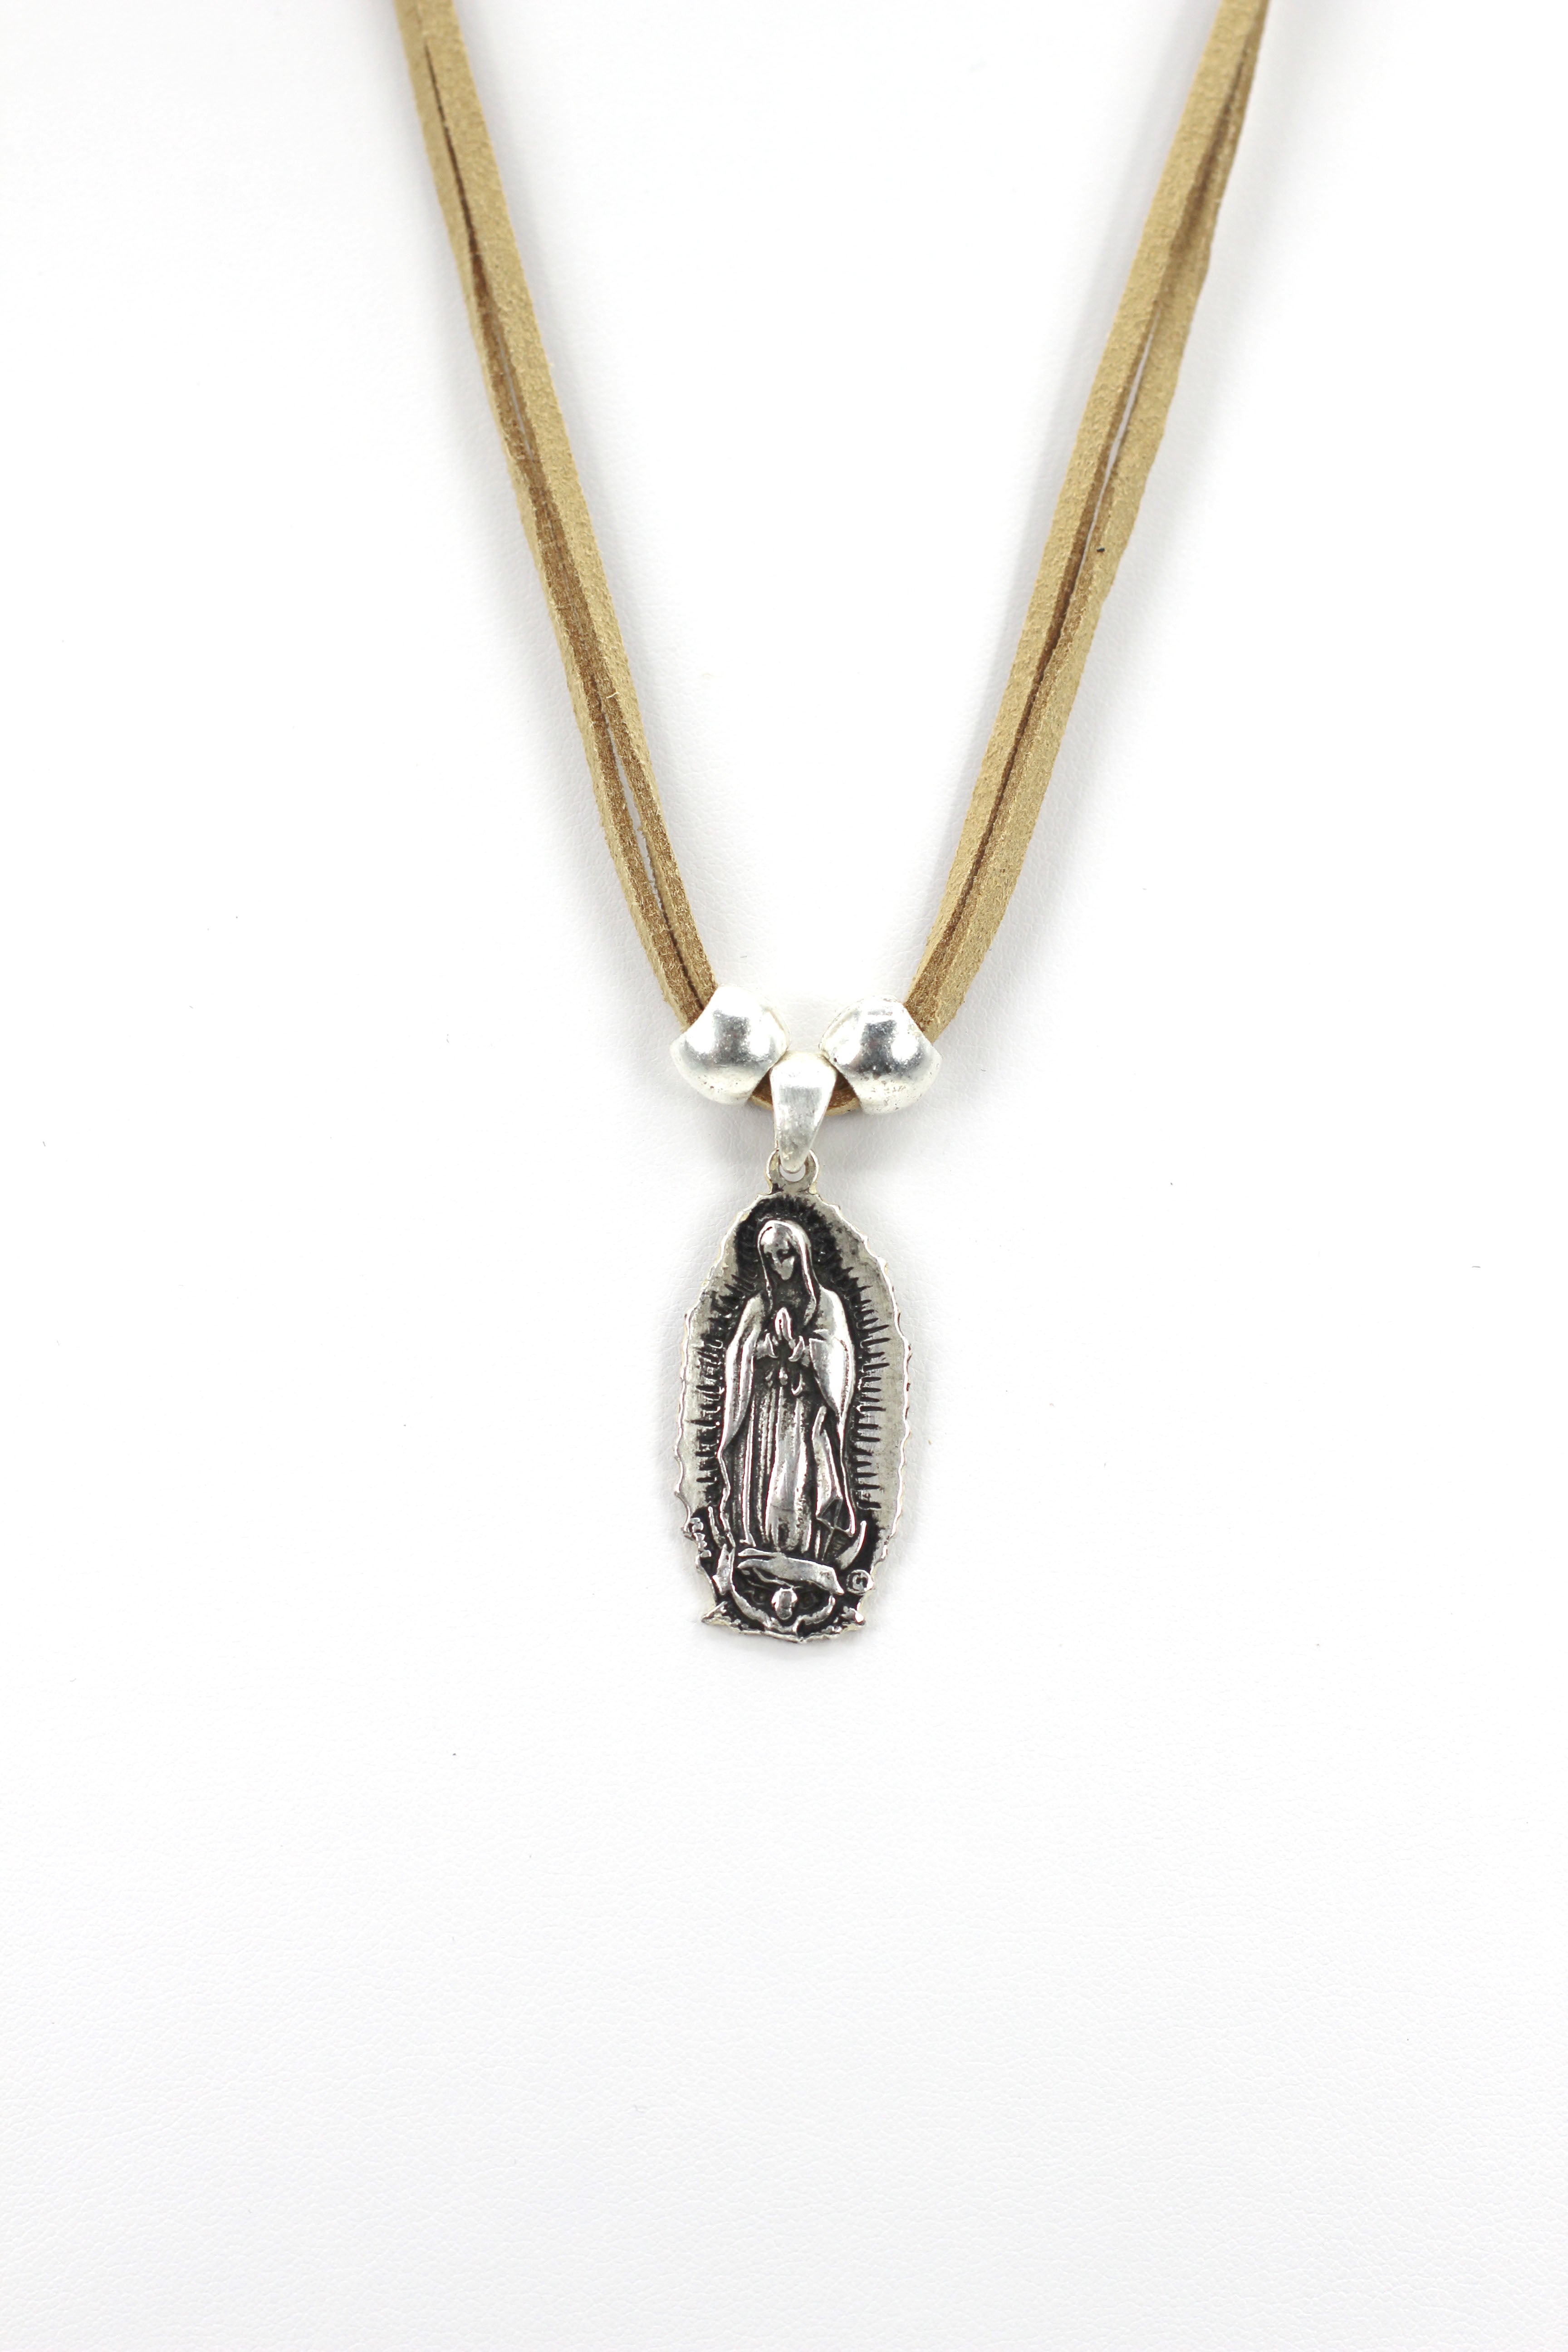 Vintage Necklace of Our Lady Of Guadalupe - Nuestra Sra de Guadalupe Oval Shape Jewelry with Genuine Leather strap by Graciela's Collection